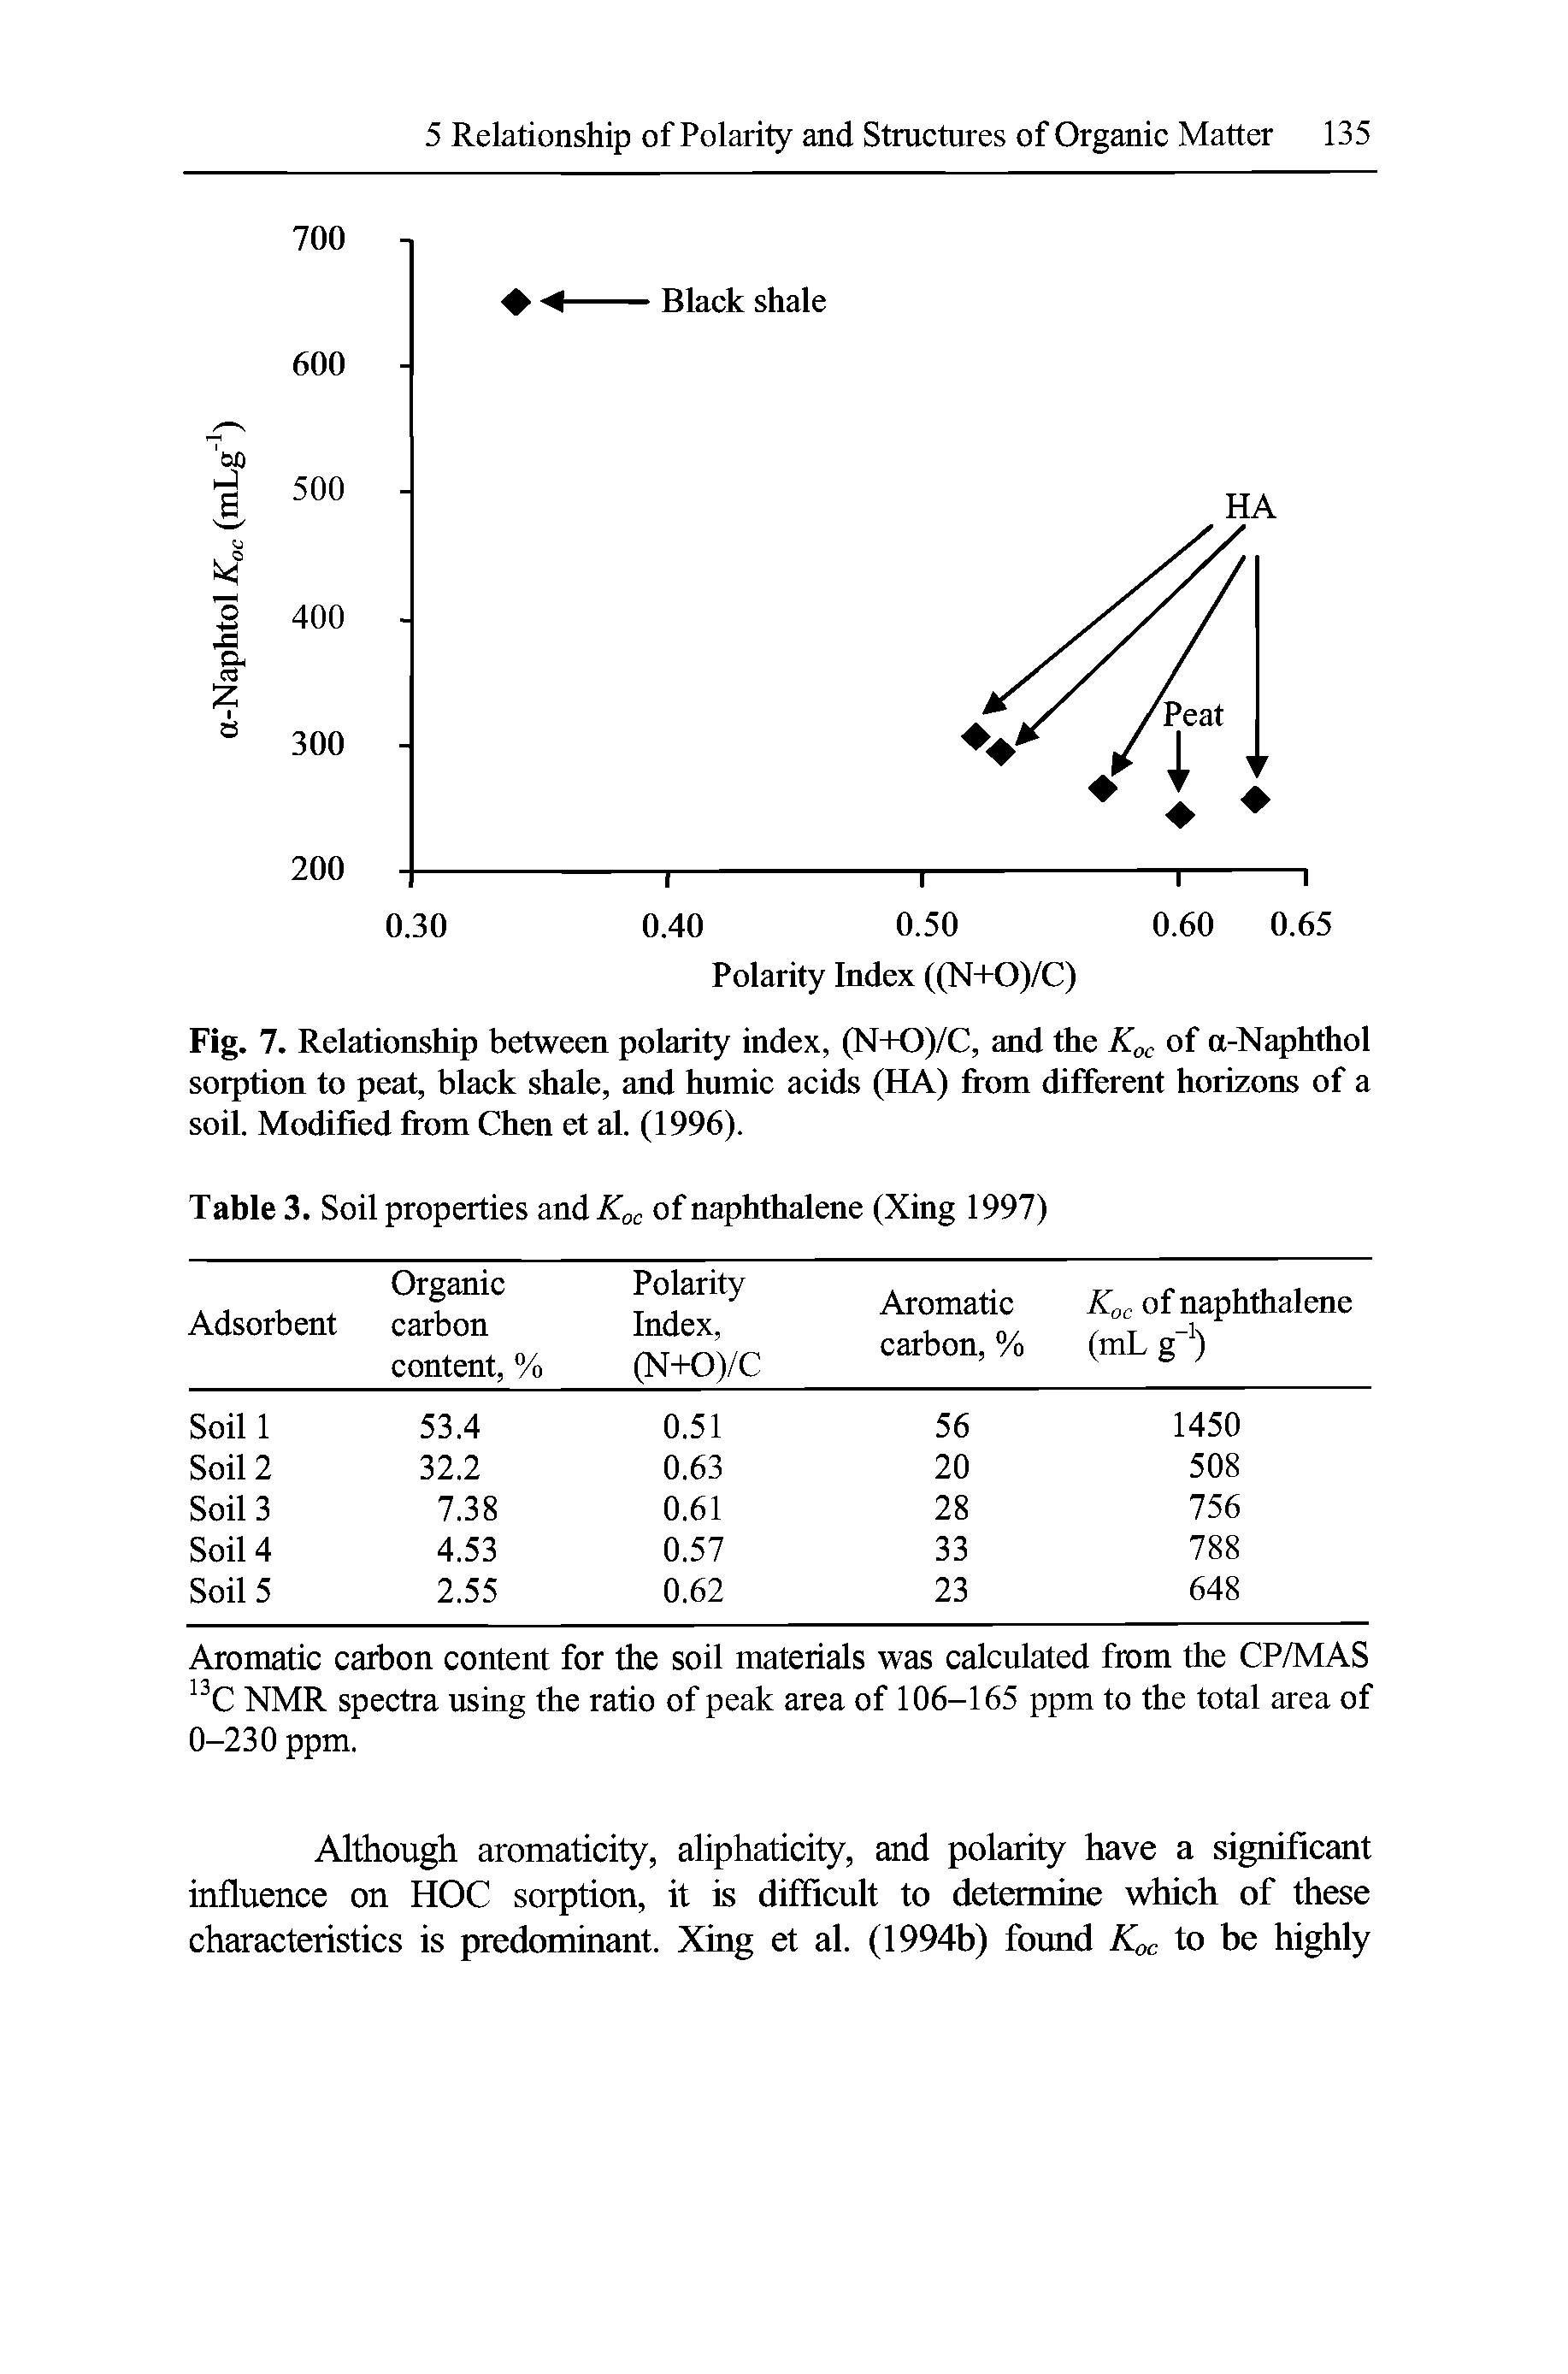 Fig. 7. Relationship between polarity index, (N+0)/C, and the Koc of a-Naphthol sorption to peat, black shale, and humic acids (HA) from different horizons of a soil. Modified from Chen et al. (1996).